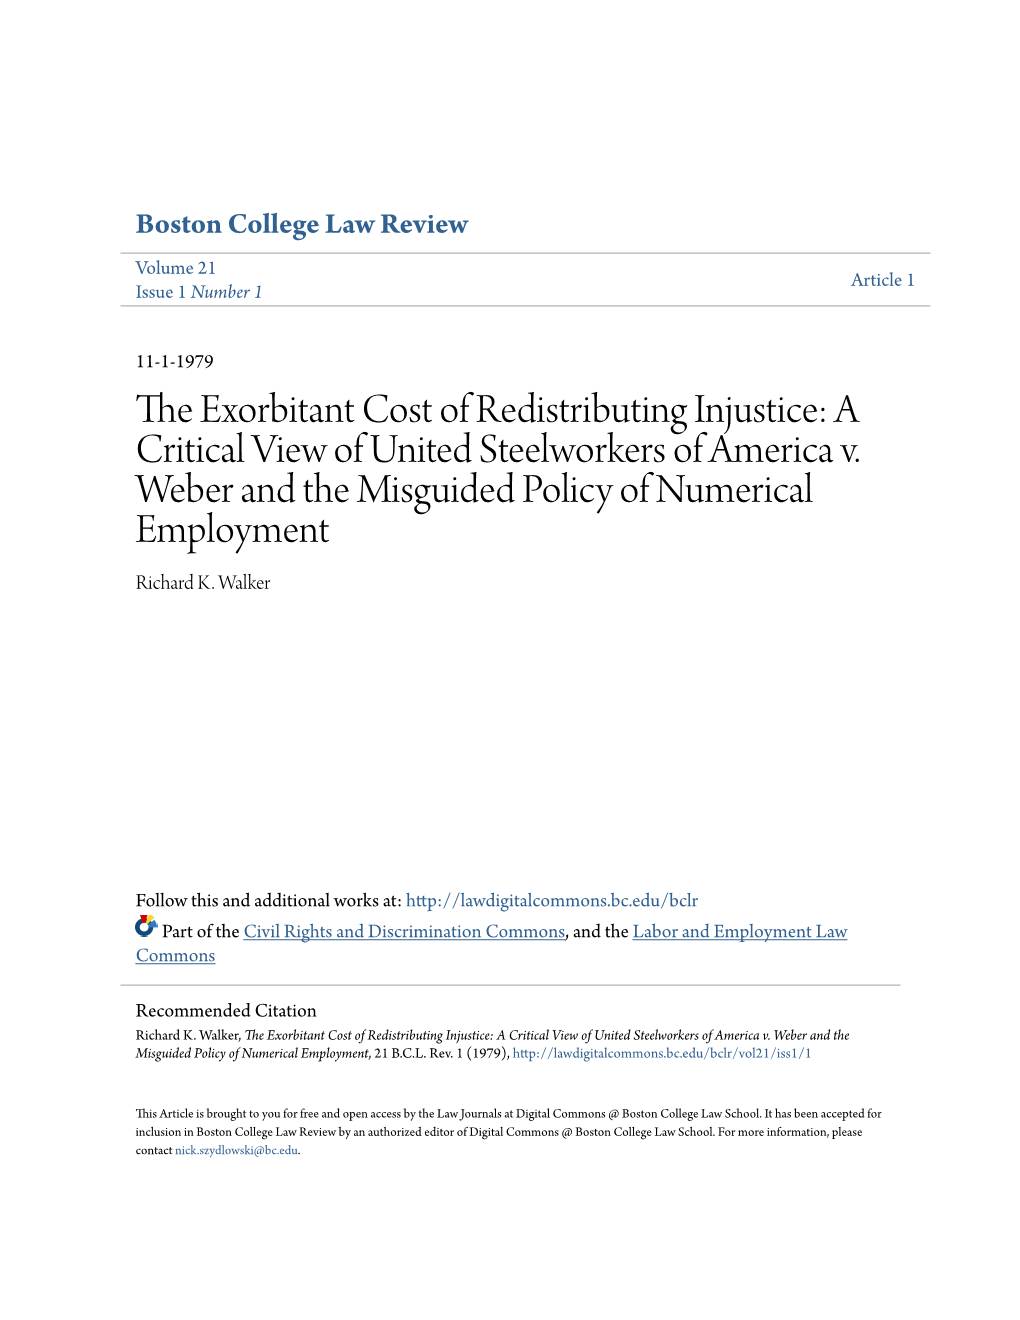 A Critical View of United Steelworkers of America V. Weber and the Misguided Policy of Numerical Employment Richard K